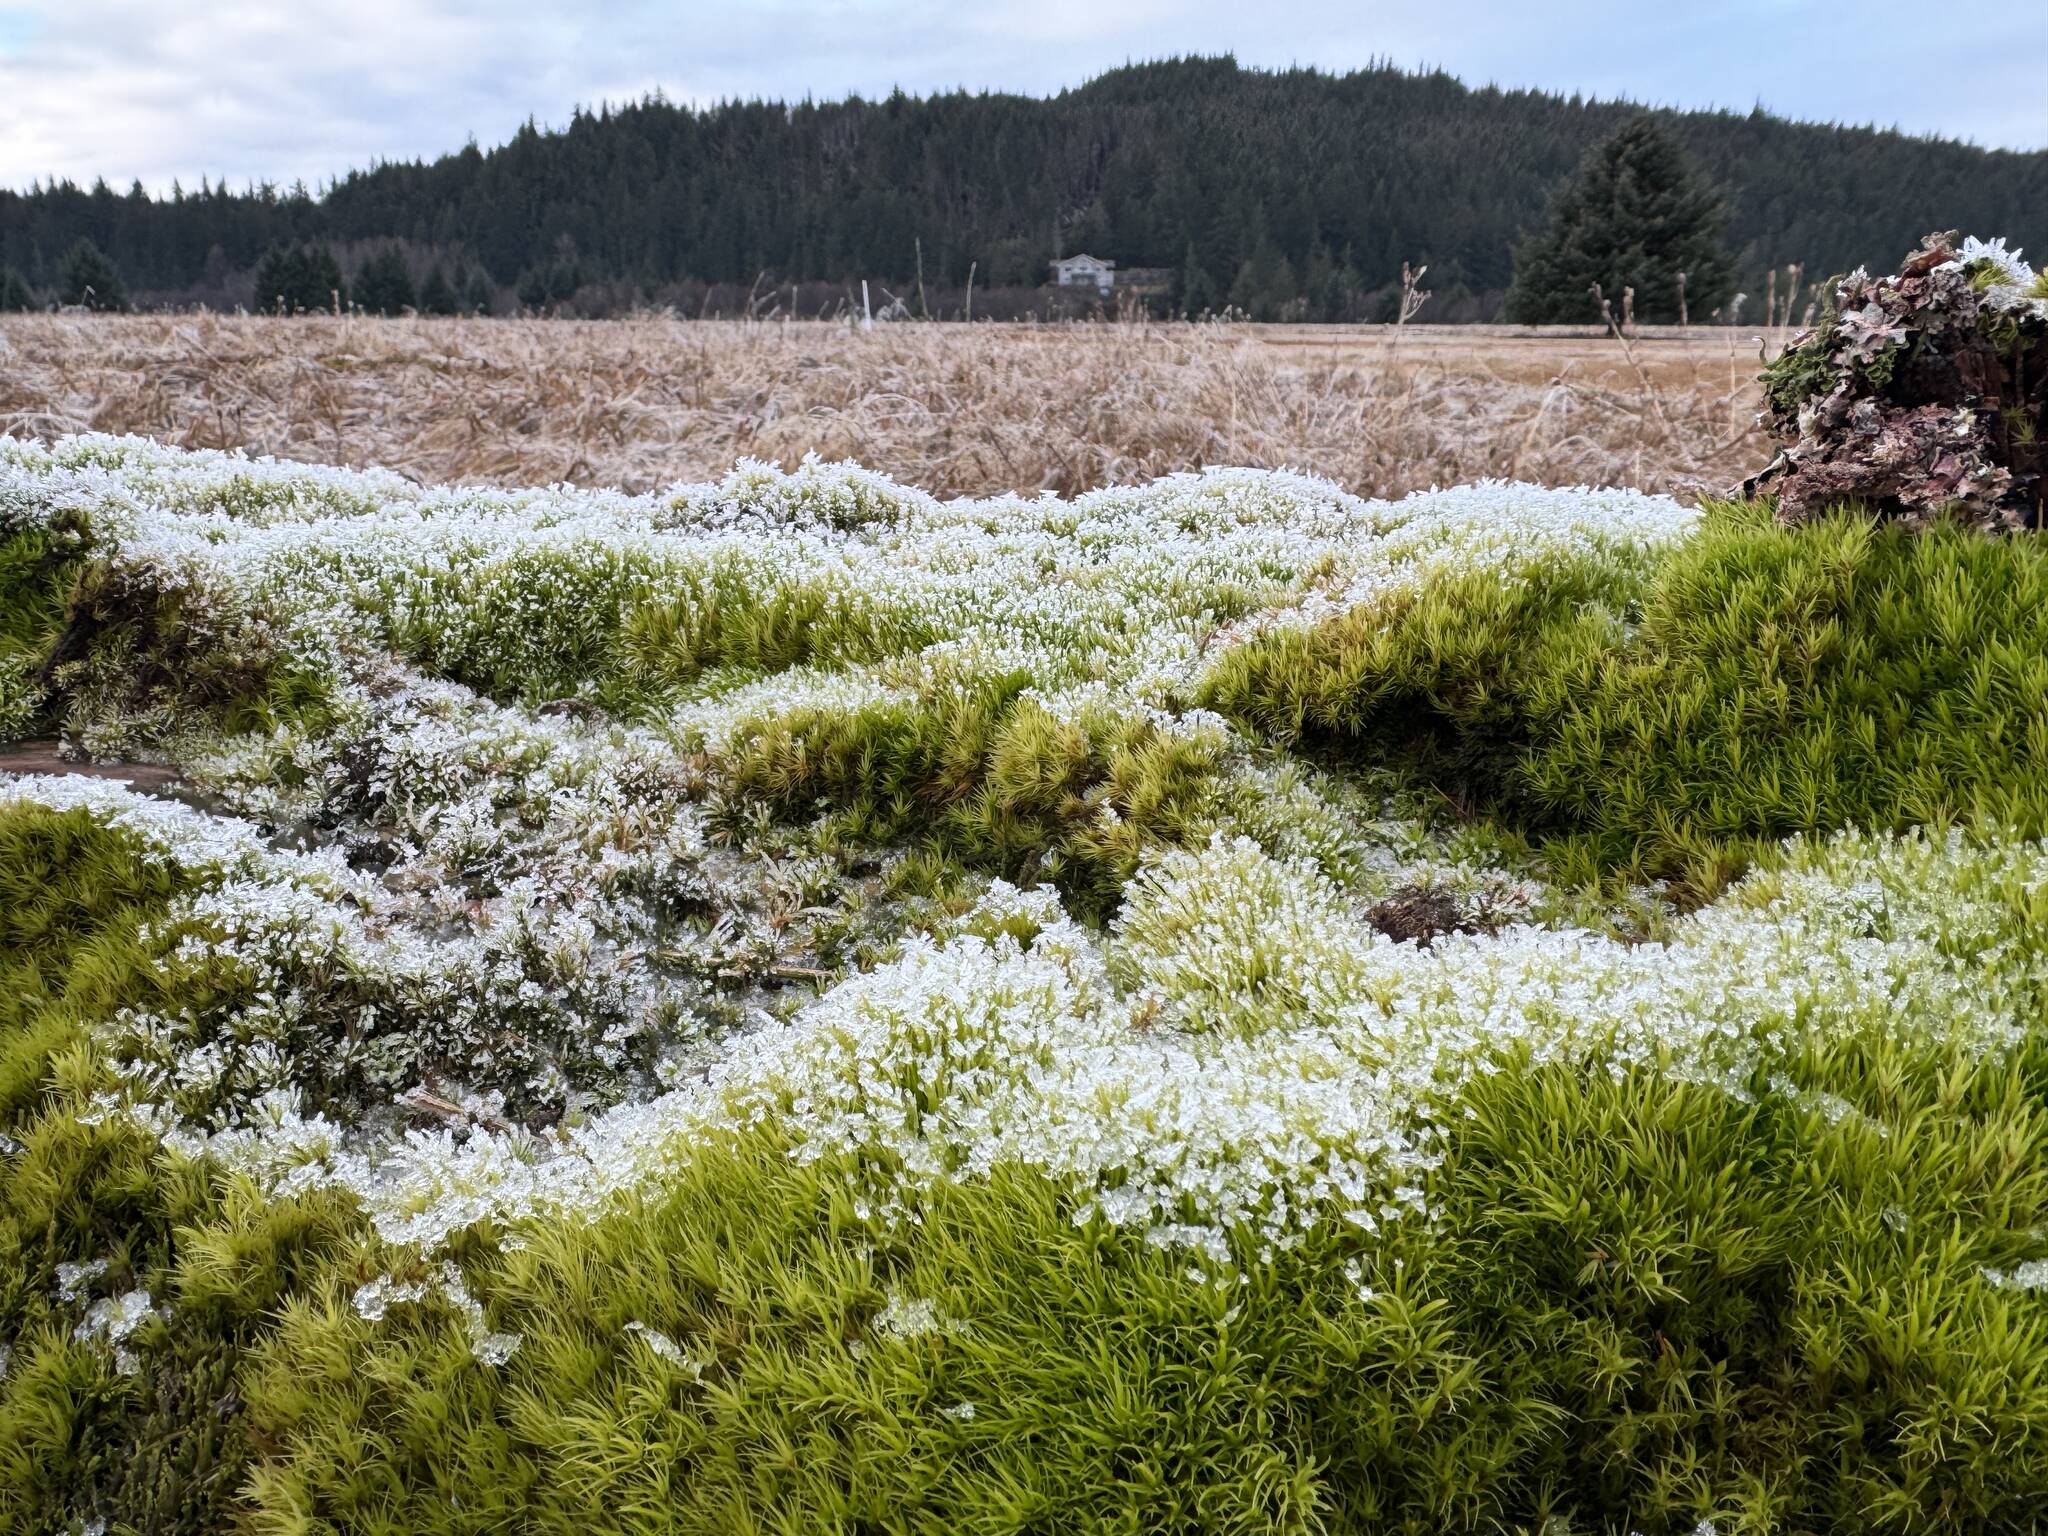 A frosty meadow along the Mendenhall Wetlands Trail on Dec. 2. (Photo by Deana Barajas)